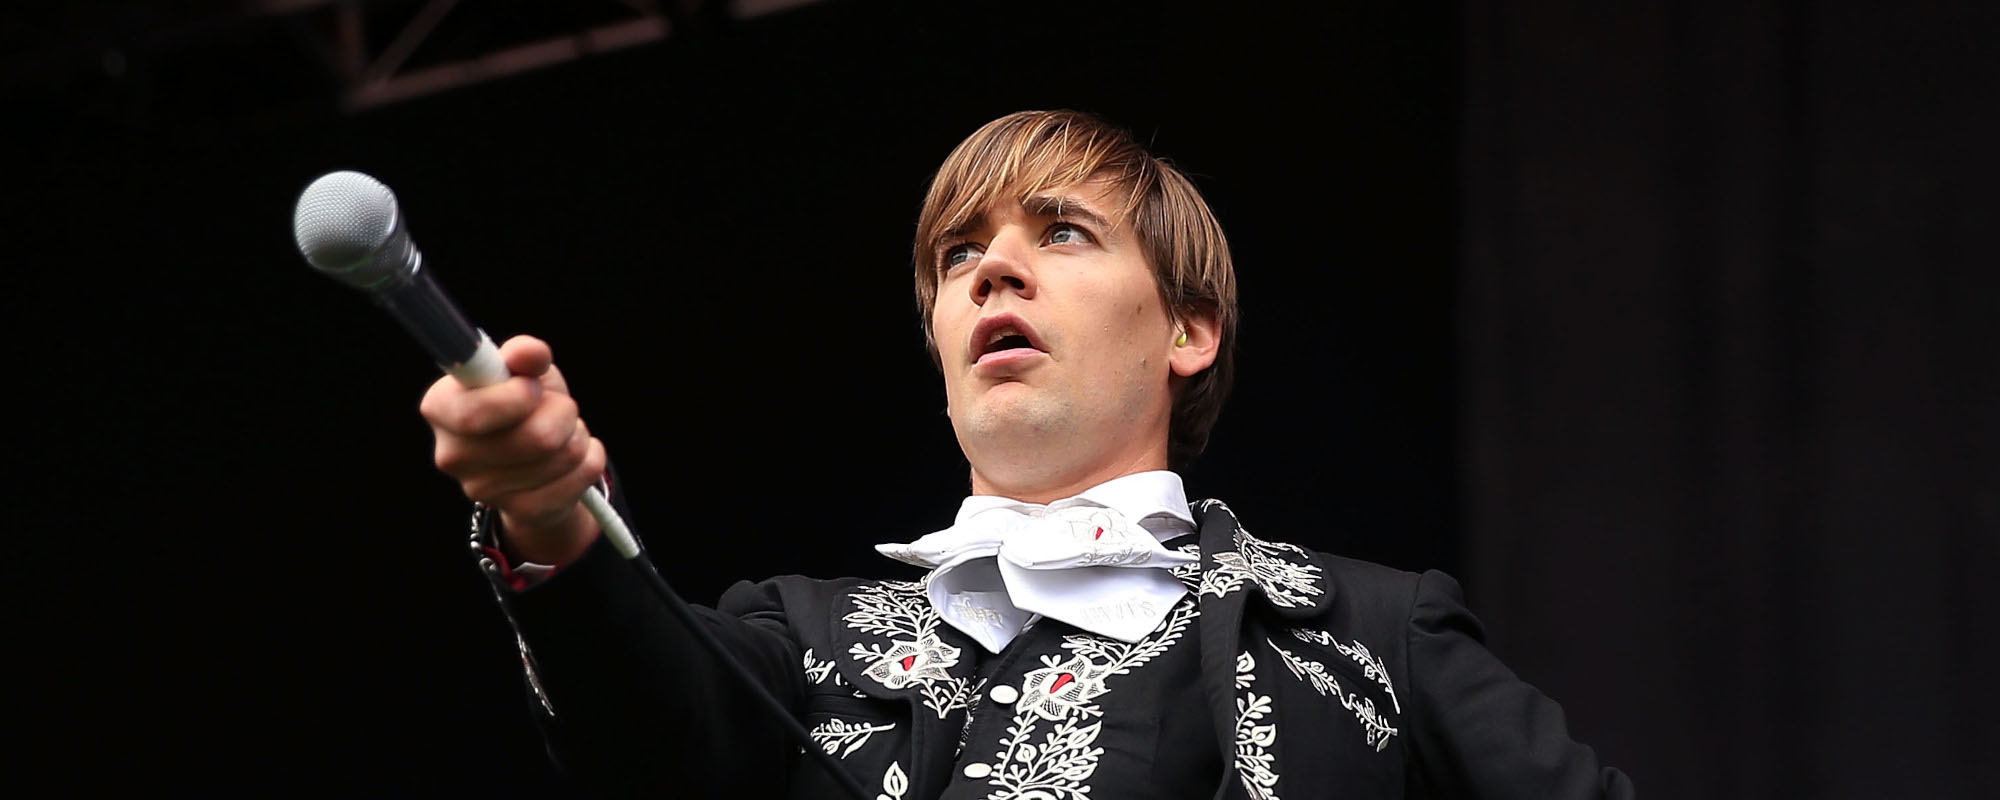 Apply Now: The Hives are Taking Applications to Start Offical Cover Bands